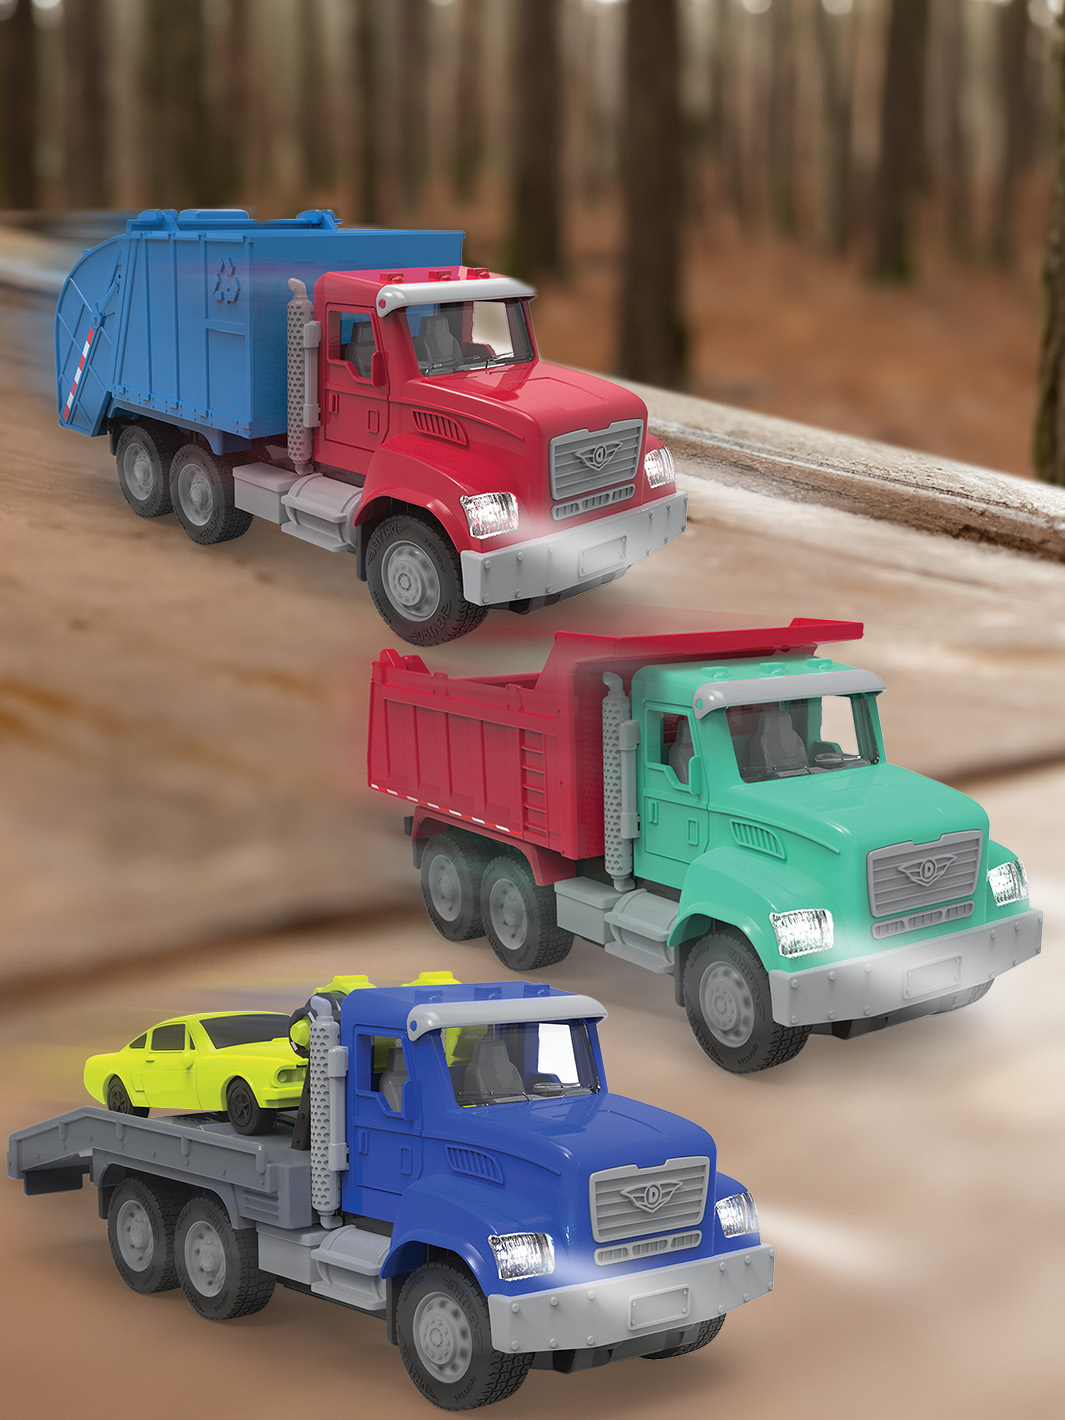 5 Pack Cars Toys for 2 3 4 5 6 Years Old Toddlers Boys and Girls Gift, Big  Transport Truck with 4 Small Cute Pull Back Trucks, with Sound and Light